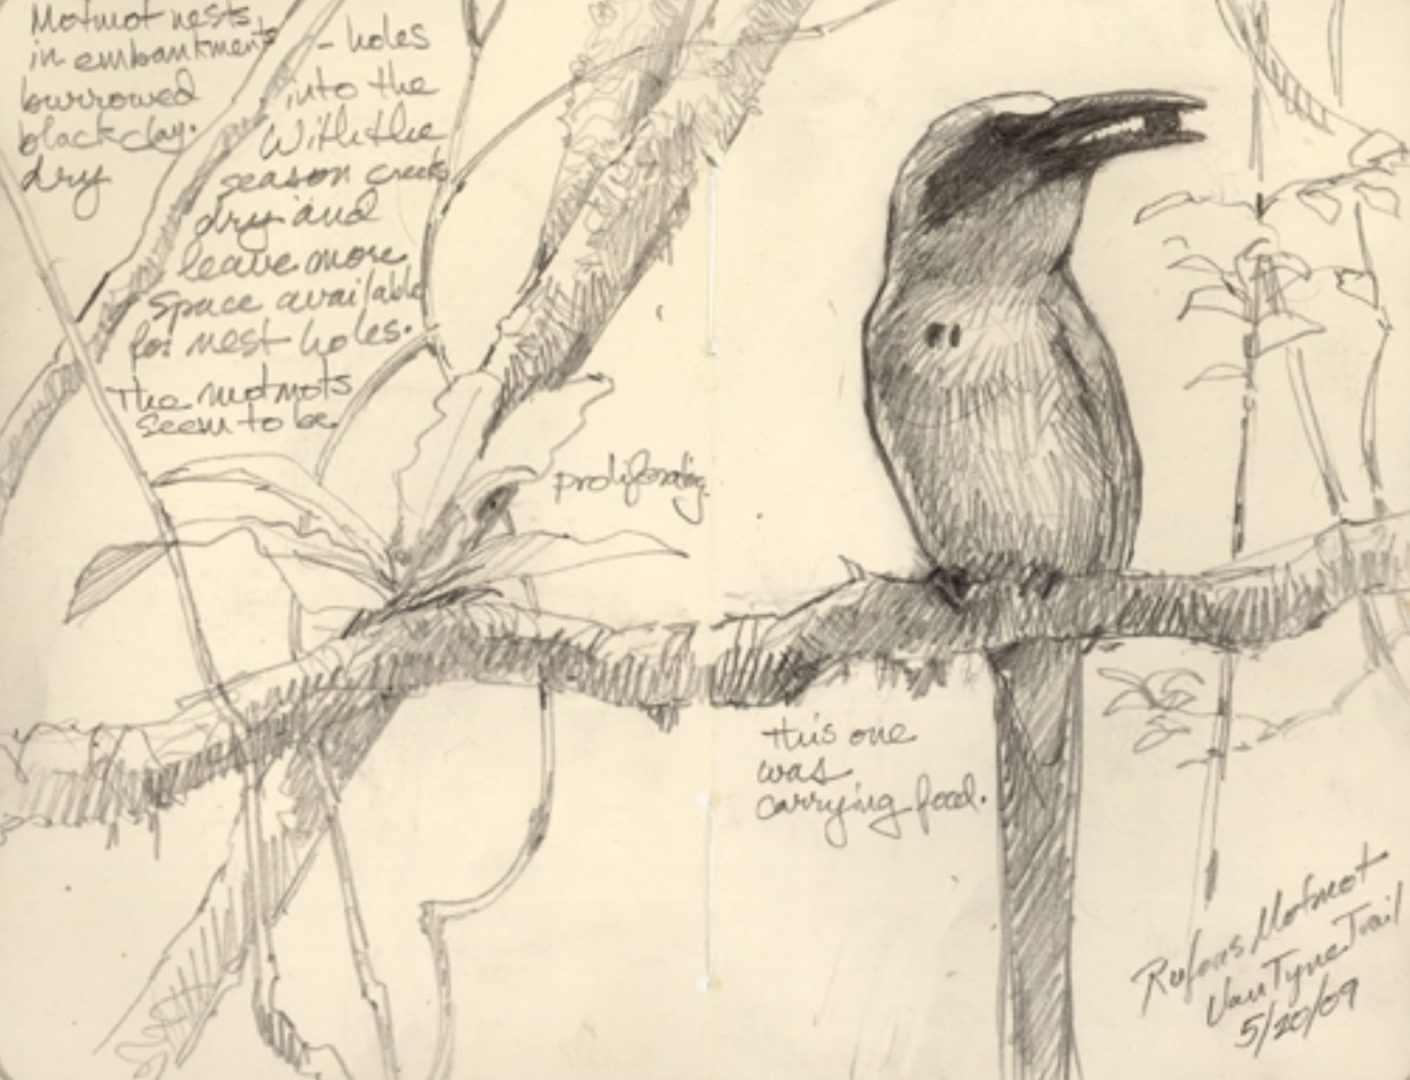 here is a good example of one of Debby Kaspari's nature sketches. There is a graphite sketch of a bird on a branch with lots of tropical plants such as moss clinging to the branch. There are handwritten notes like a nature journal page describing the bird and the scene.